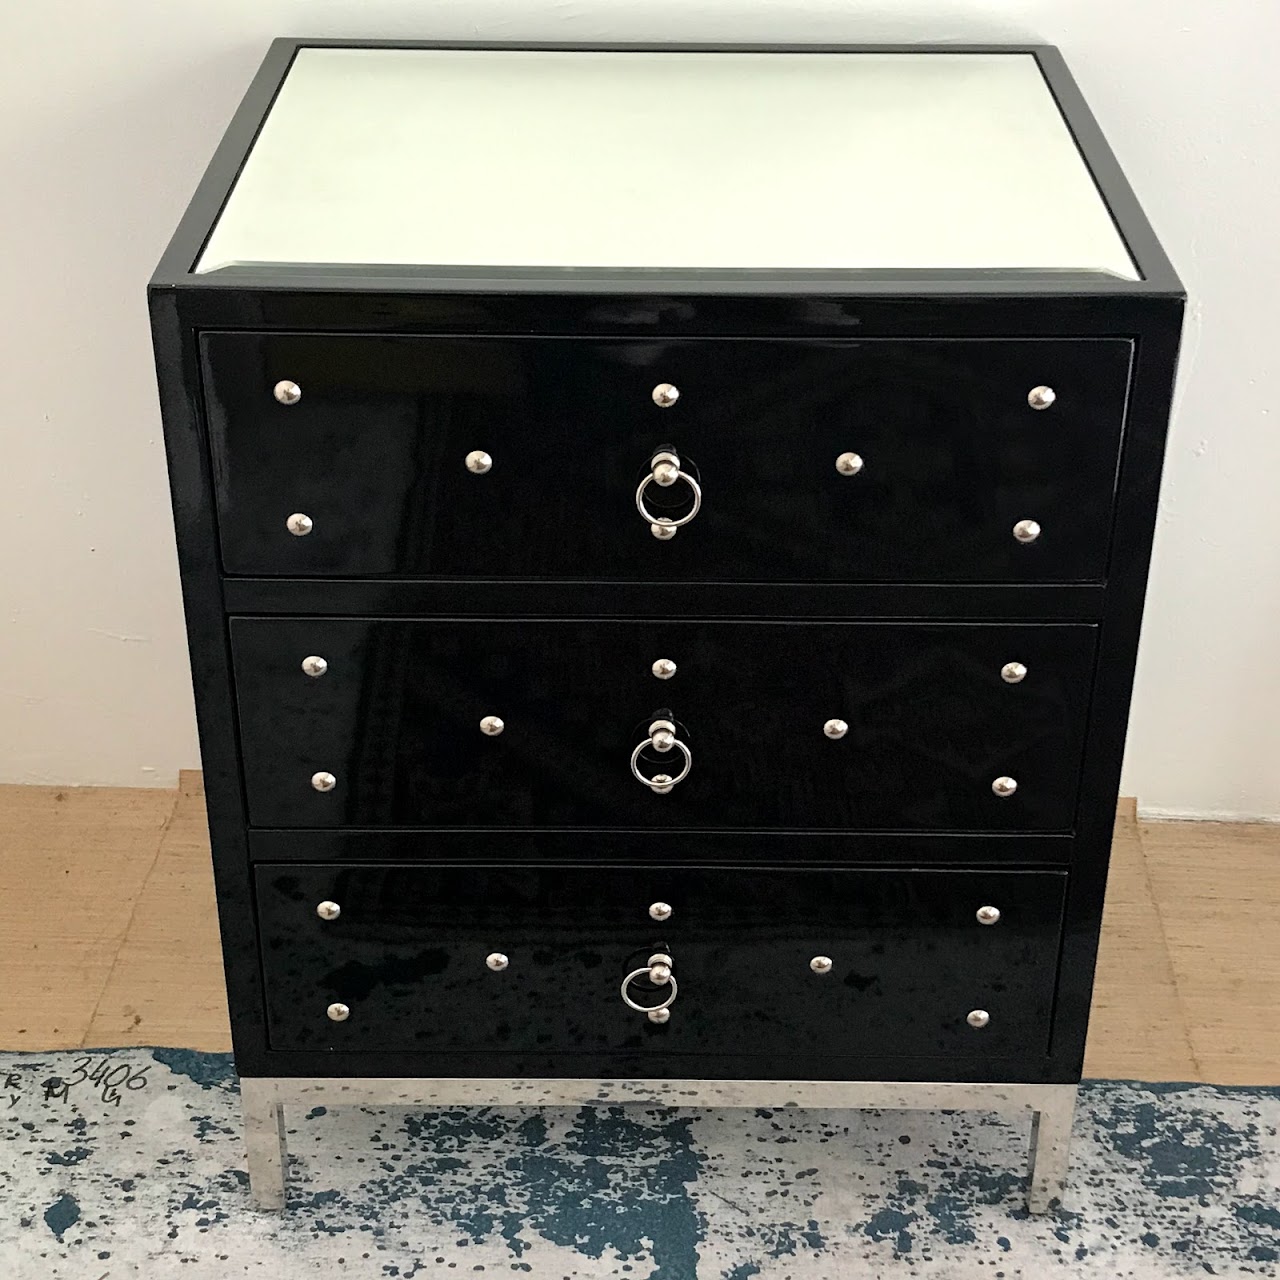 Lacquer & Chrome Mirror Top End Table #2